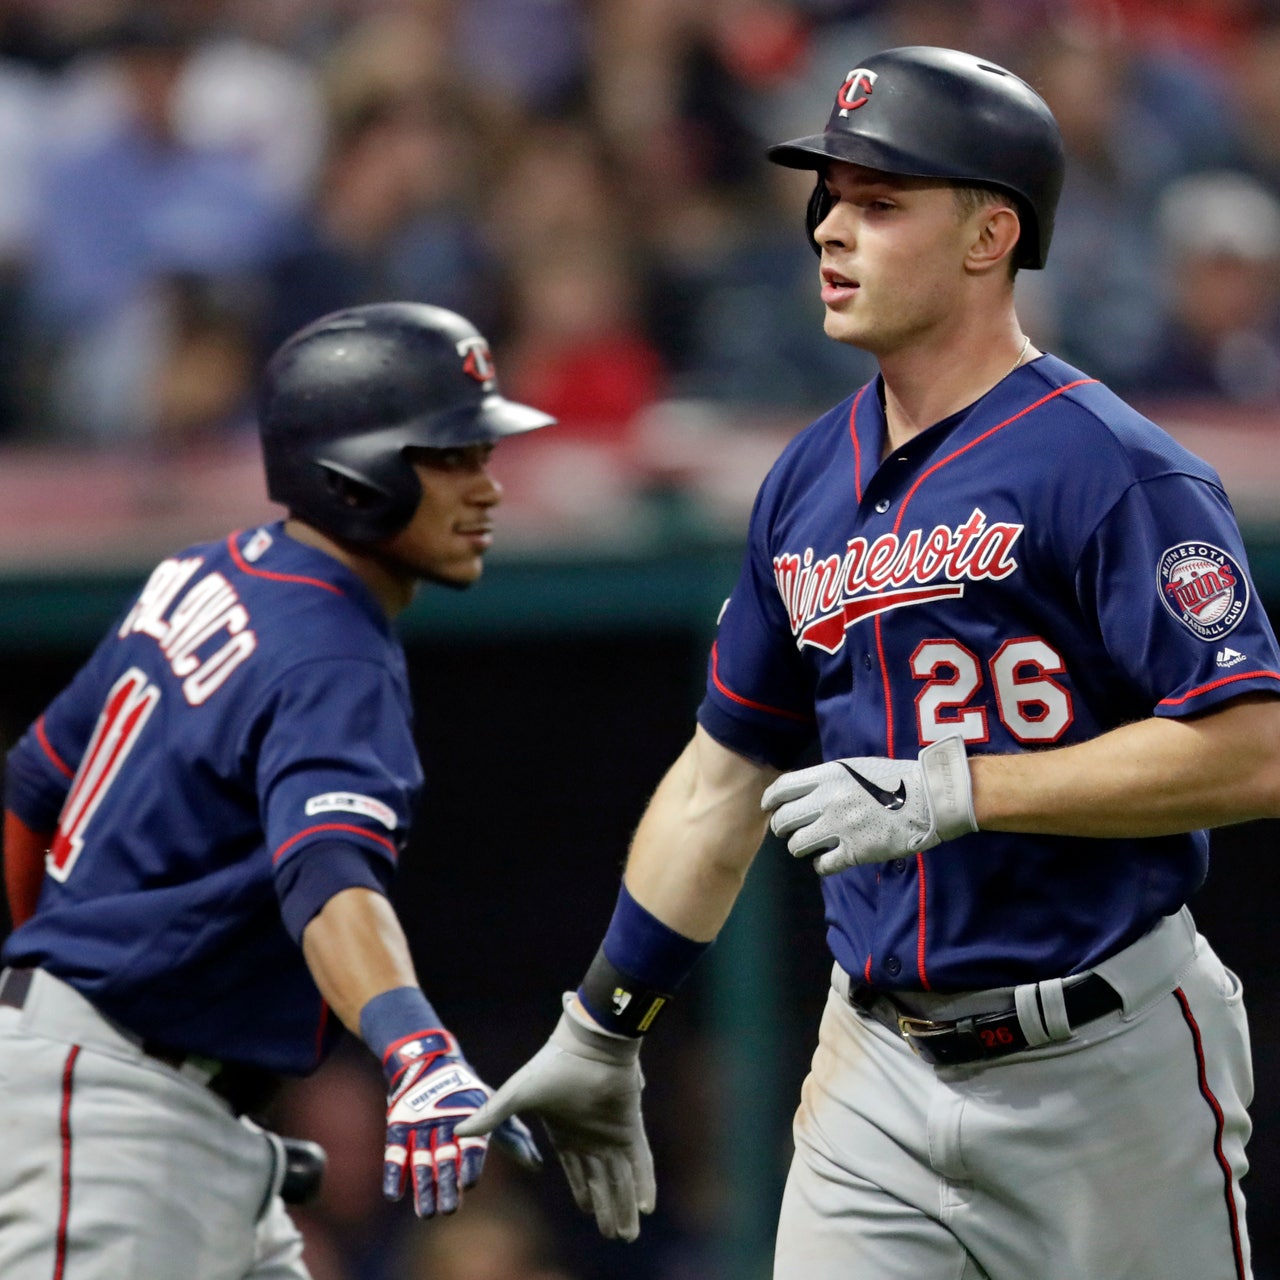 When Max Kepler hit rock bottom, the Twins kept faith — and were rewarded